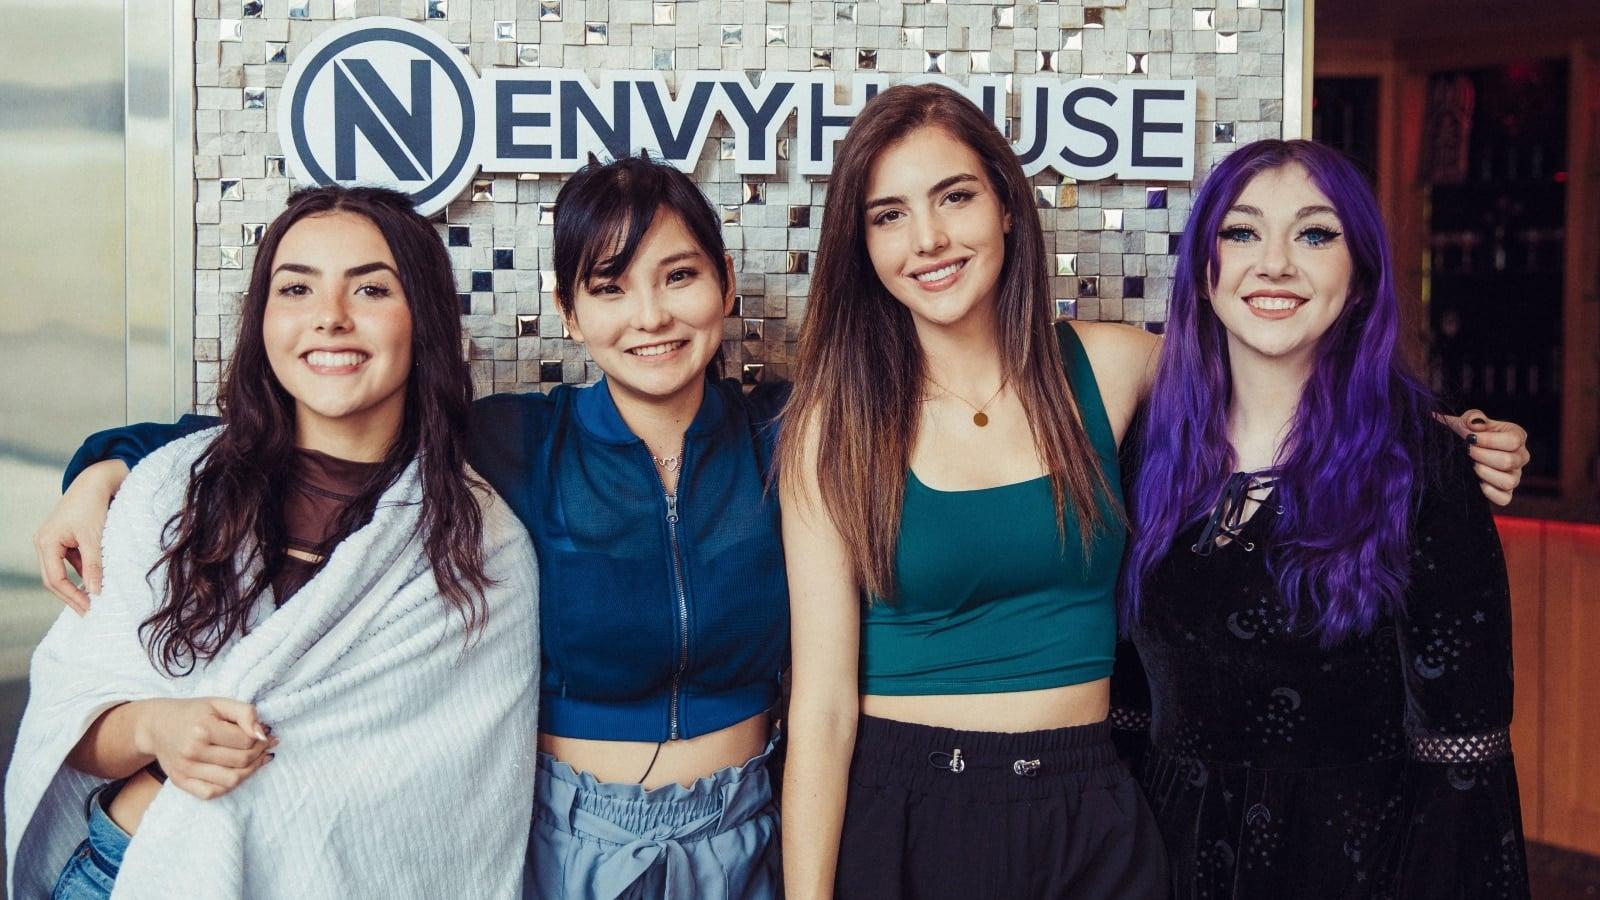 Envy House opening with JustaMinx, the Botez sisters, and CodeMiko